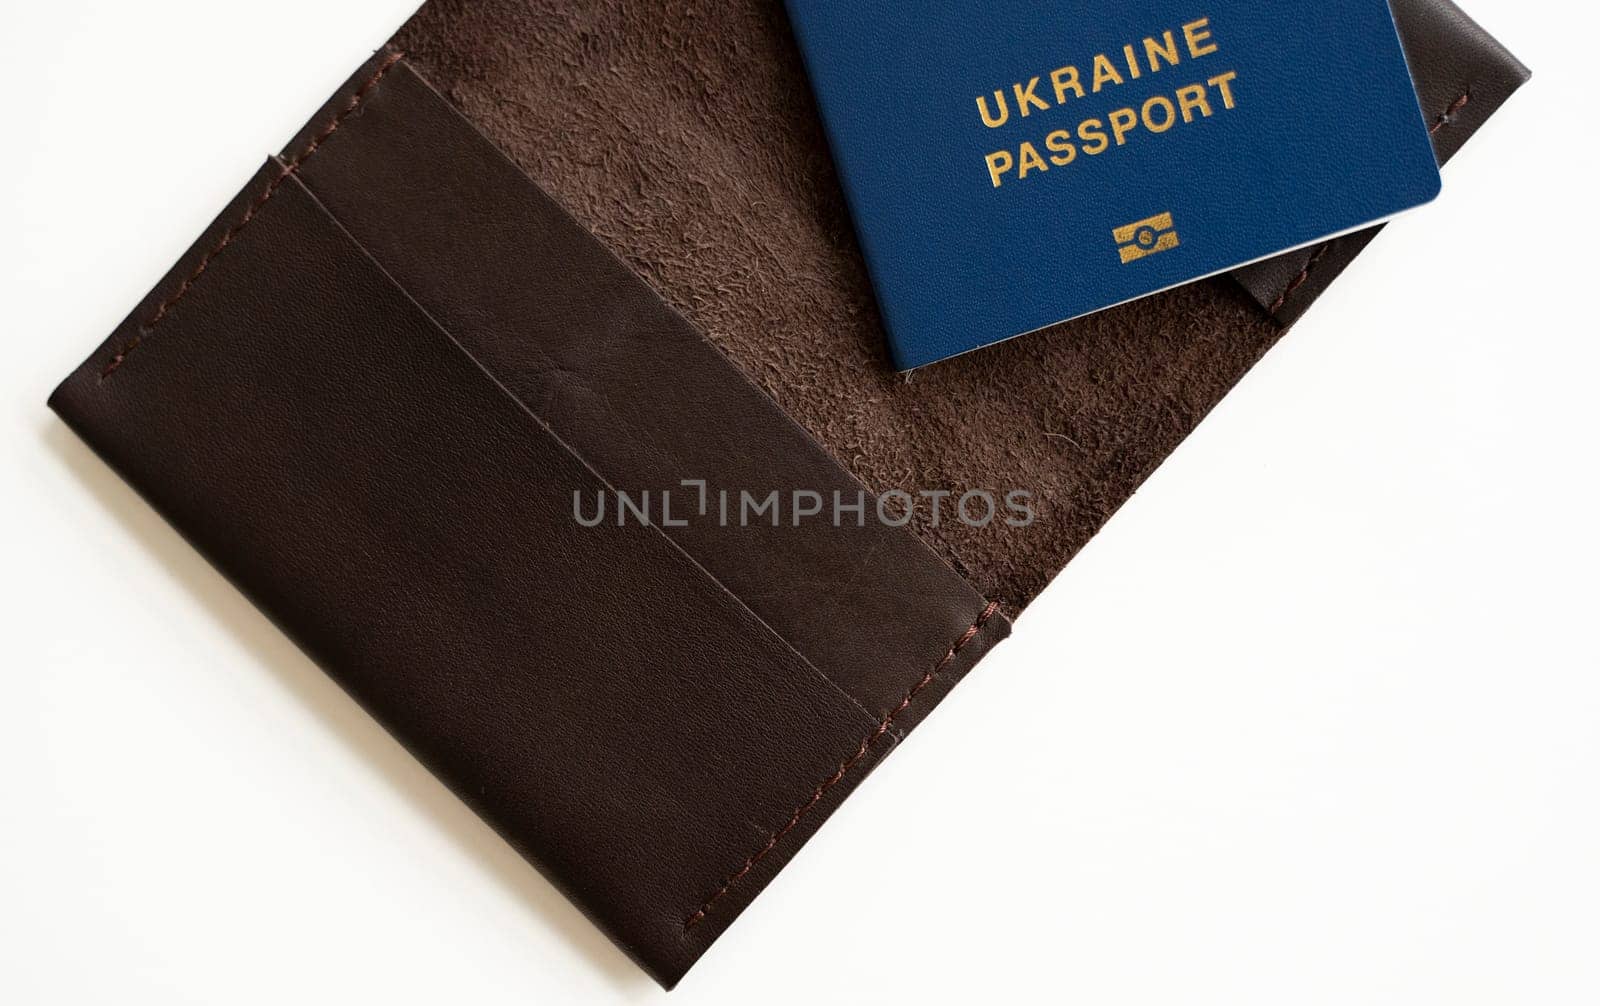 Ukrainian biometric passport id on a leather passport cover to travel the Europe without visas on the table. Inscription in Ukrainian Ukraine Passport. by vovsht